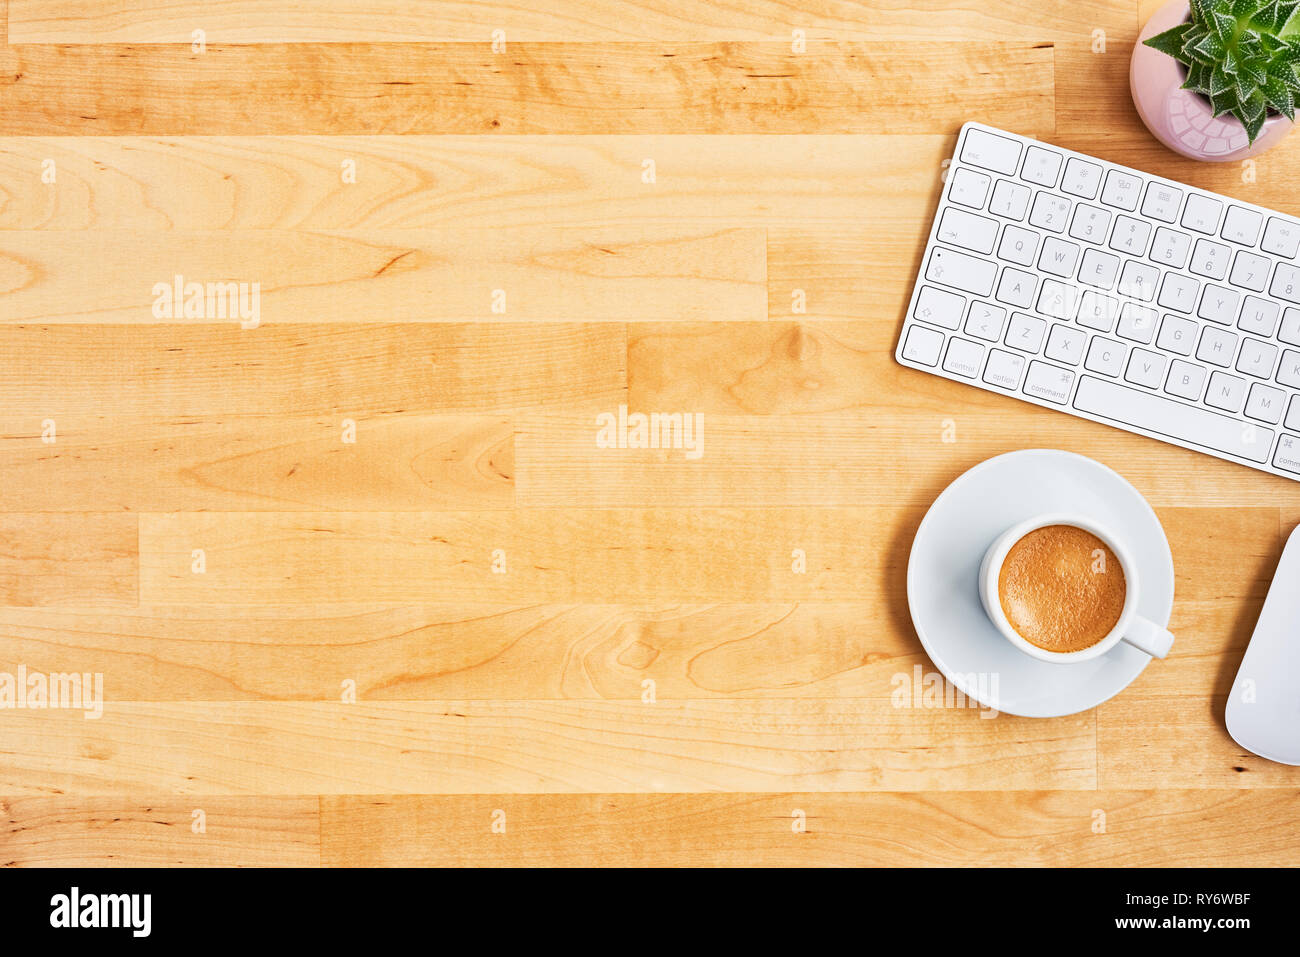 Cup of coffee or espresso with keyboard, mouse and plant on yellow wooden table. Office desktop concept. Top view. Copy space for text. Flat lay. Stock Photo